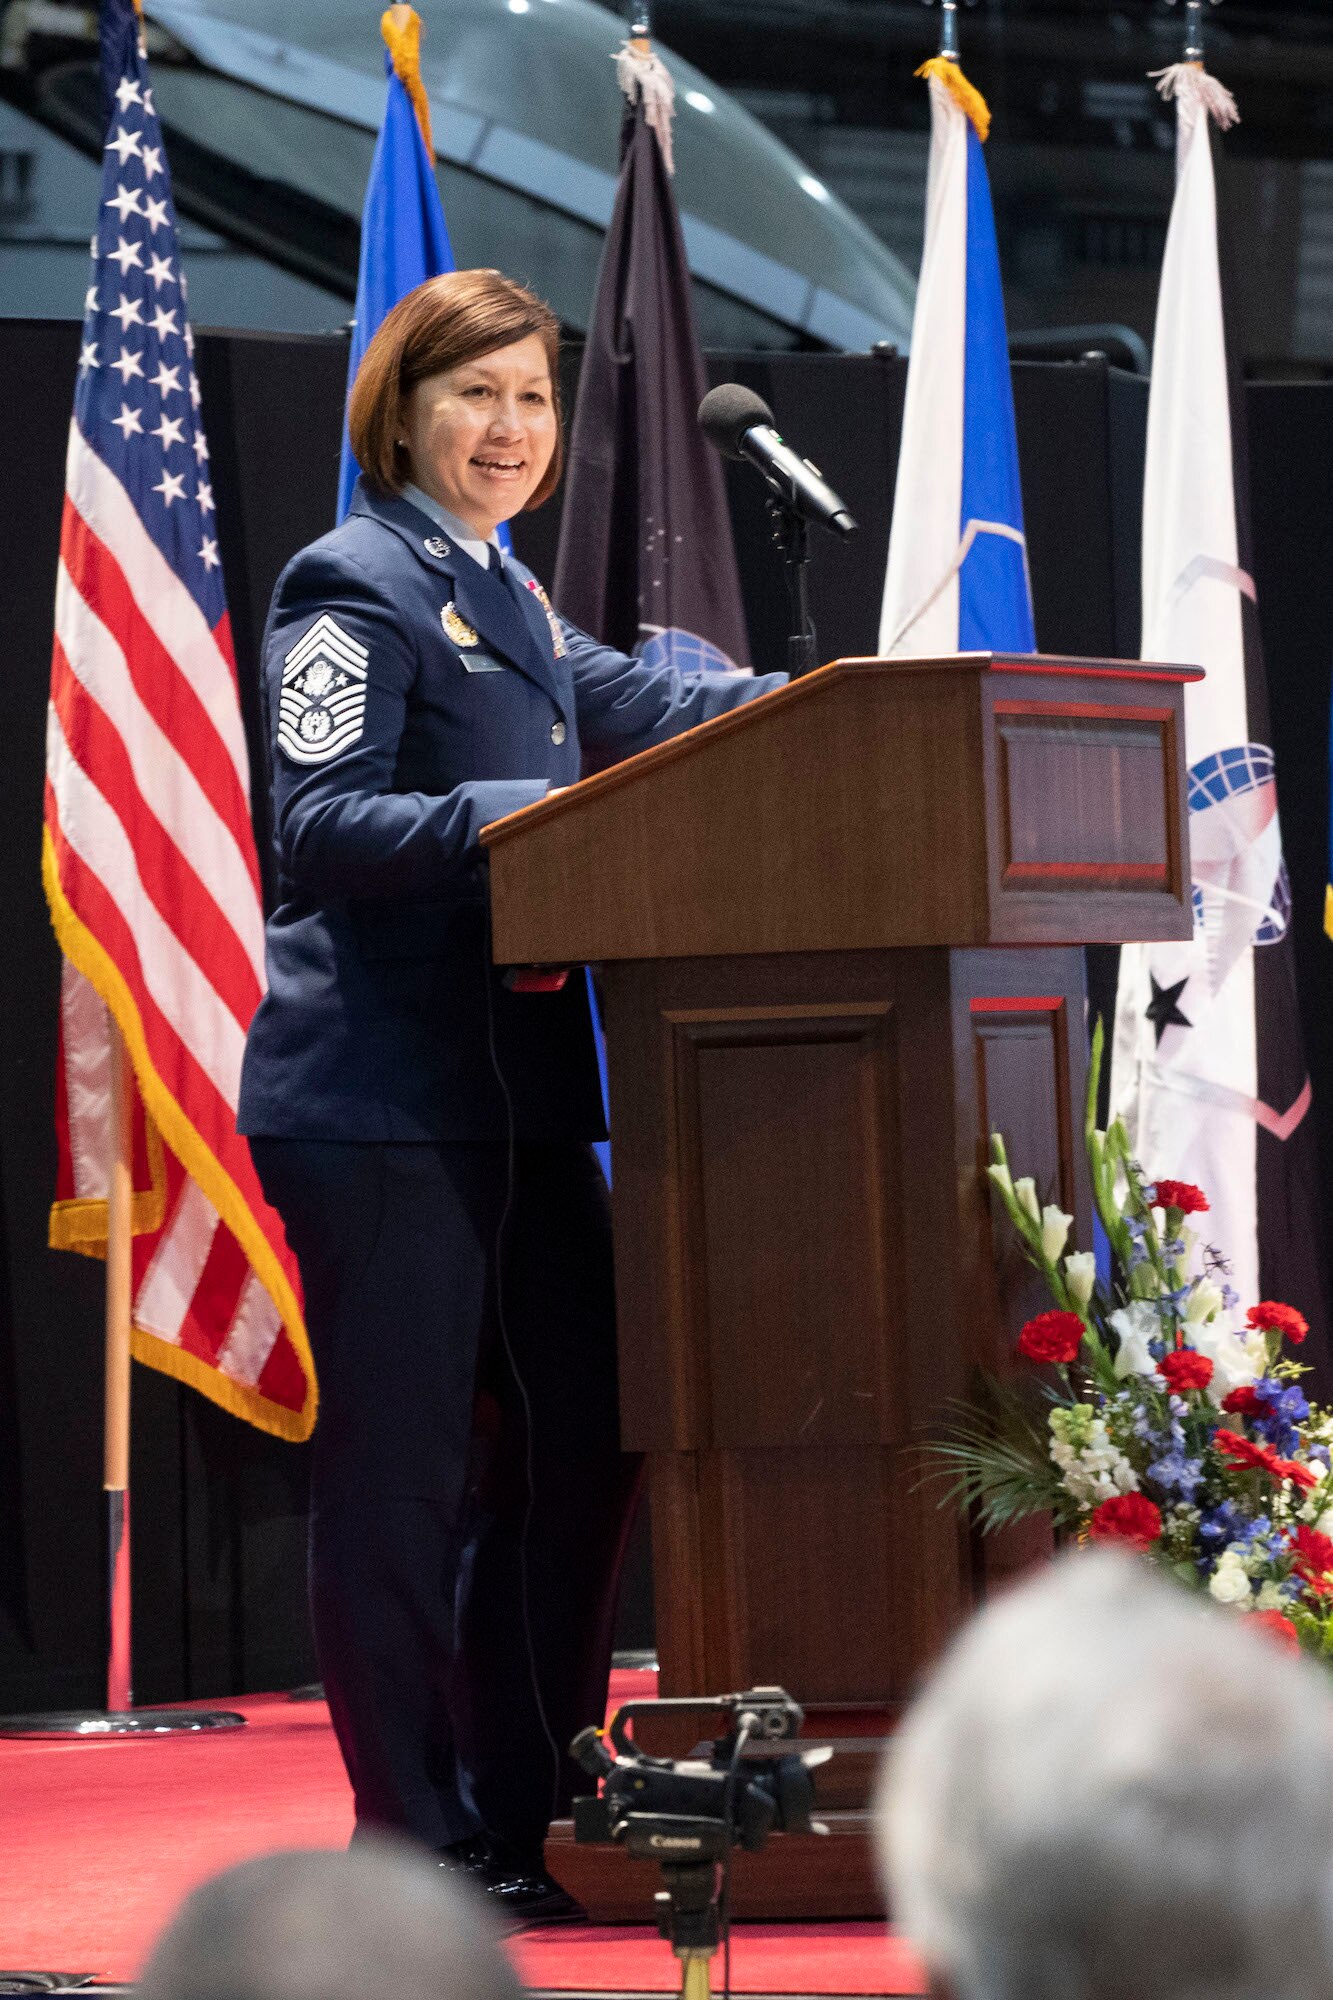 Chief Master Sergeant of the Air Force, JoAnne Bass, was keynote speaker for the opening of an Enlisted Force Exhibit at the National Museum of the U.S. Air Force on November 9, 2023. In the photo Chief Bass stands at a lectern in her blue uniform.